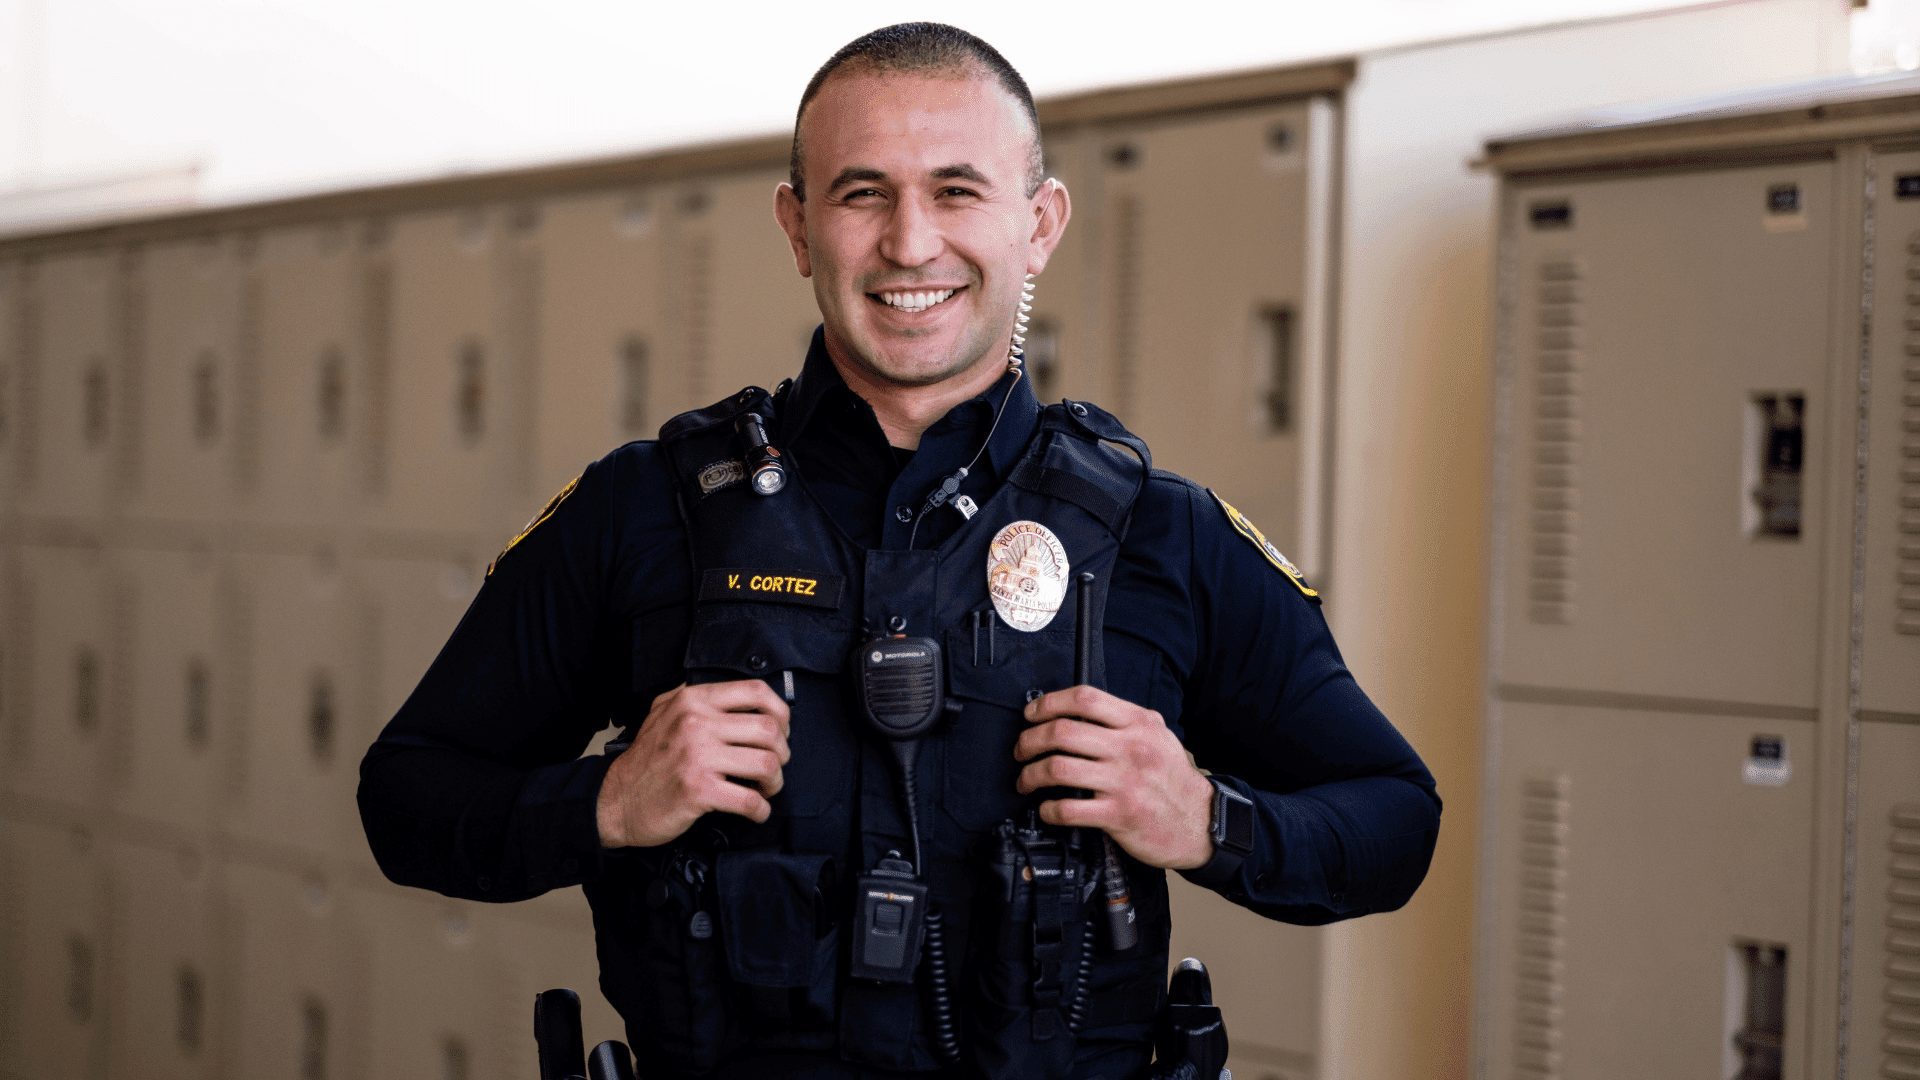 Santa Maria Police Officer Victor Cortez poses for a photo in front of the station's equipment lockers